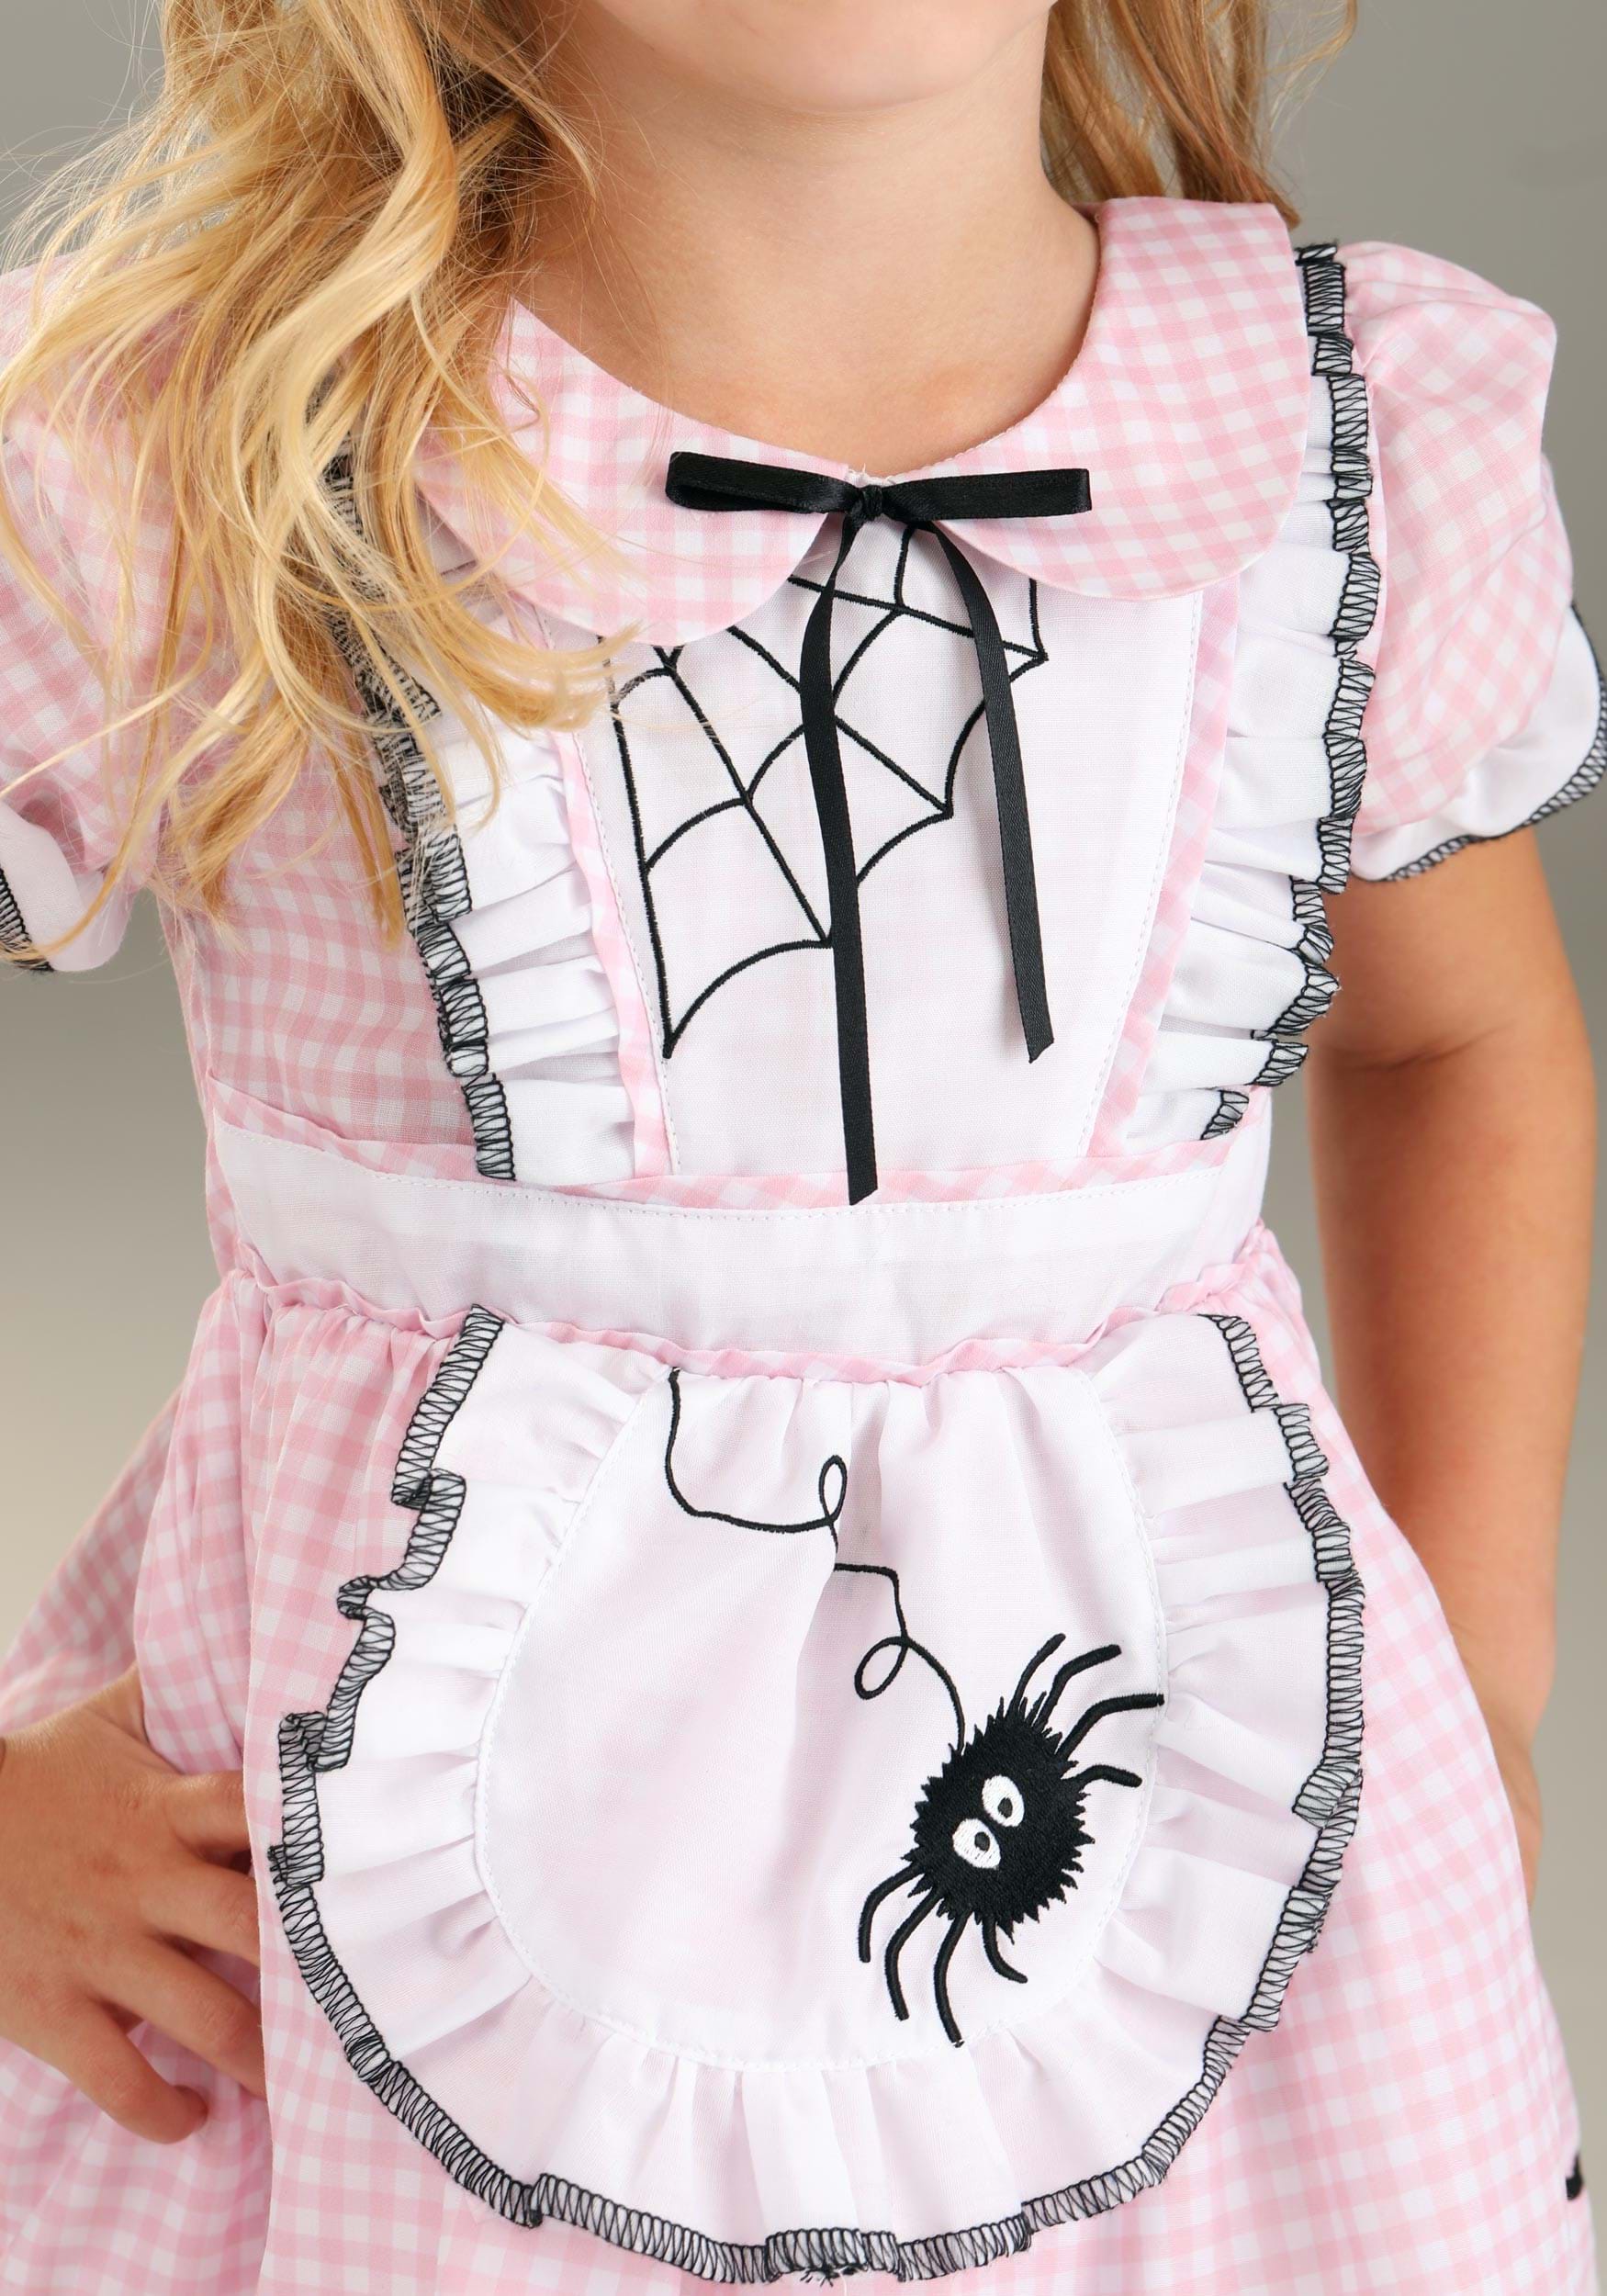 Toddler Miss Muffet Costume - image 4 of 6